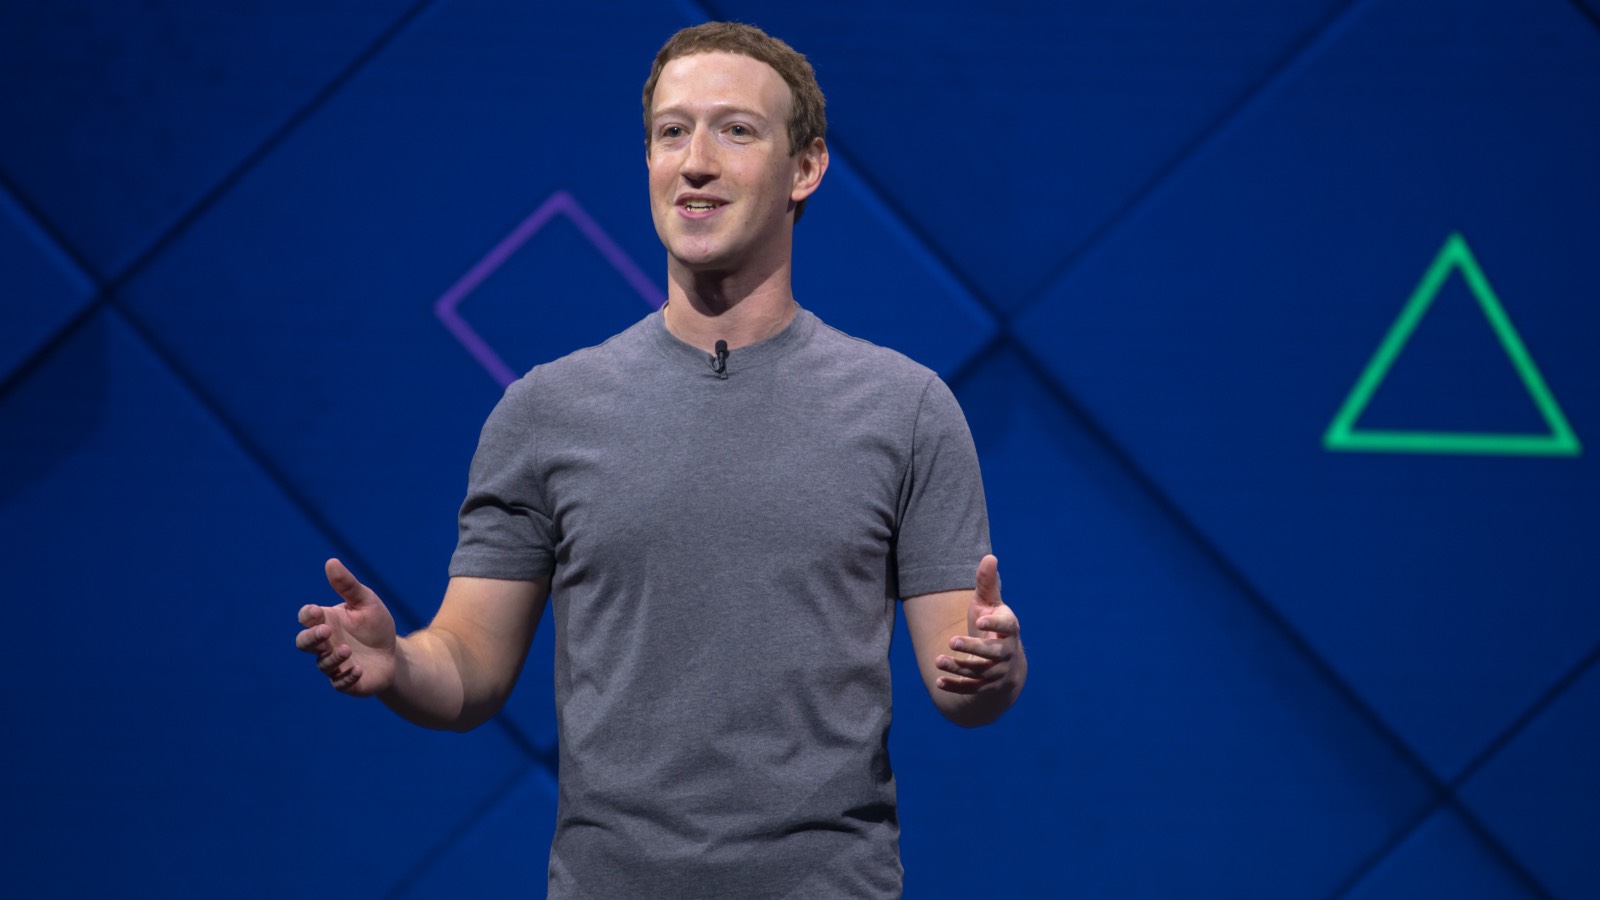 Zuckerberg Says If Anyone Should Be Fired, It’s Him